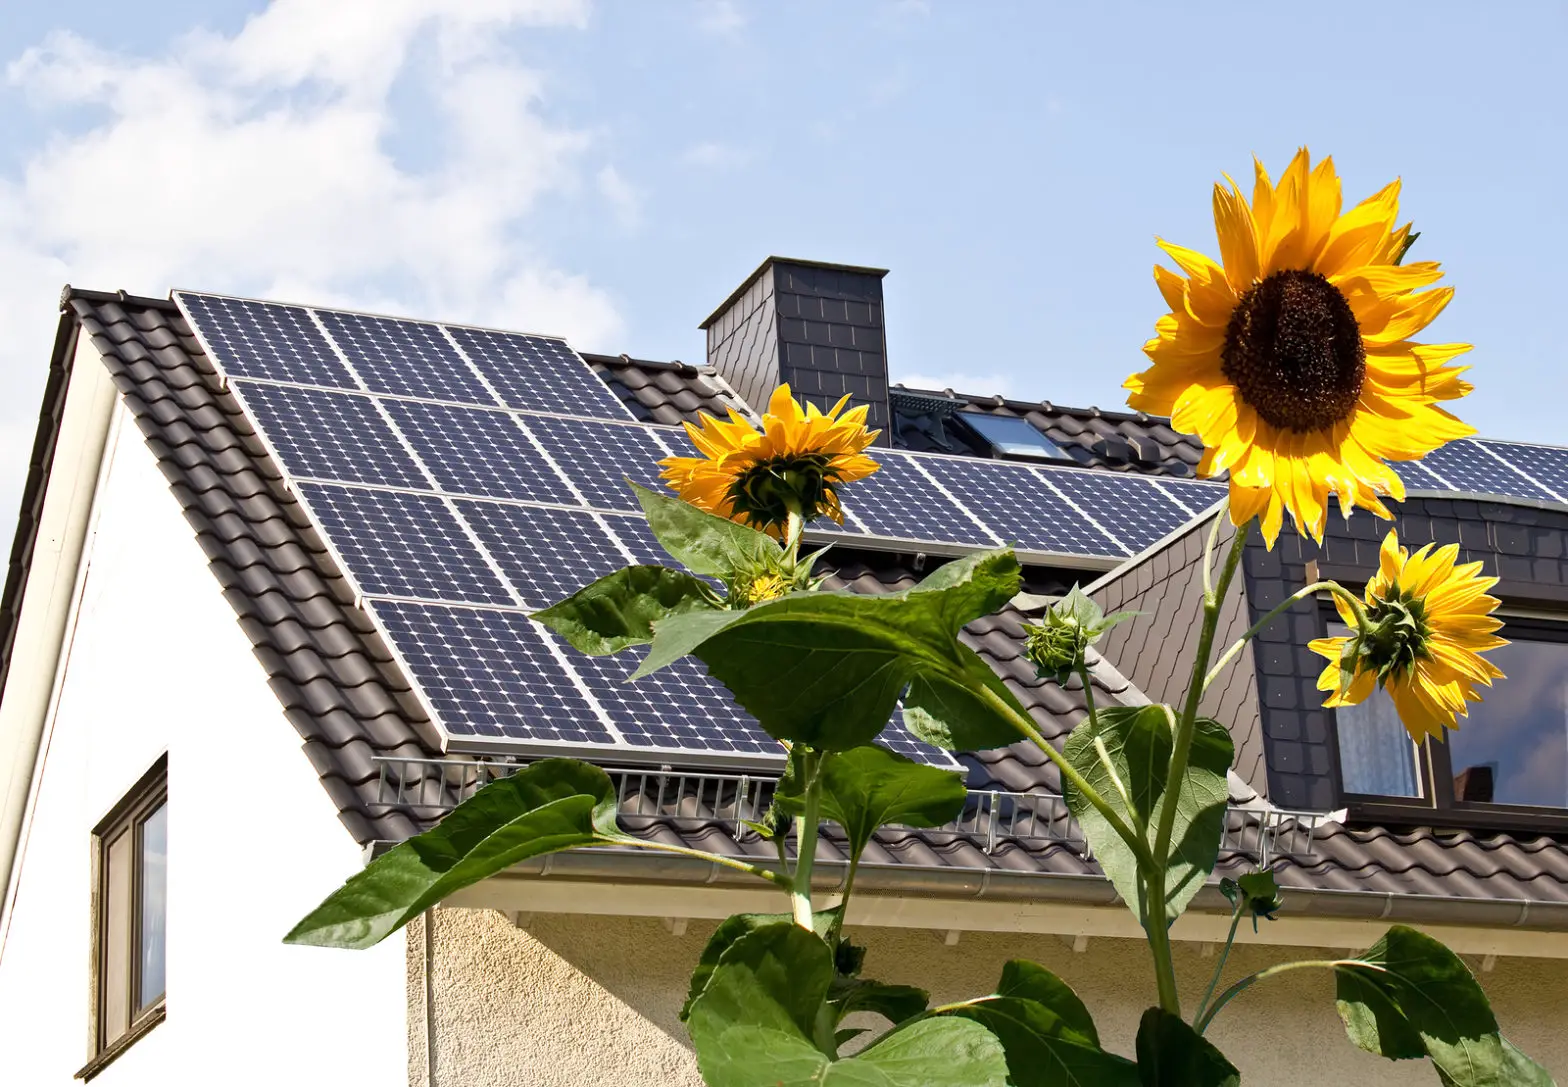 Solar cells on a roof with sun flowers in the foreground